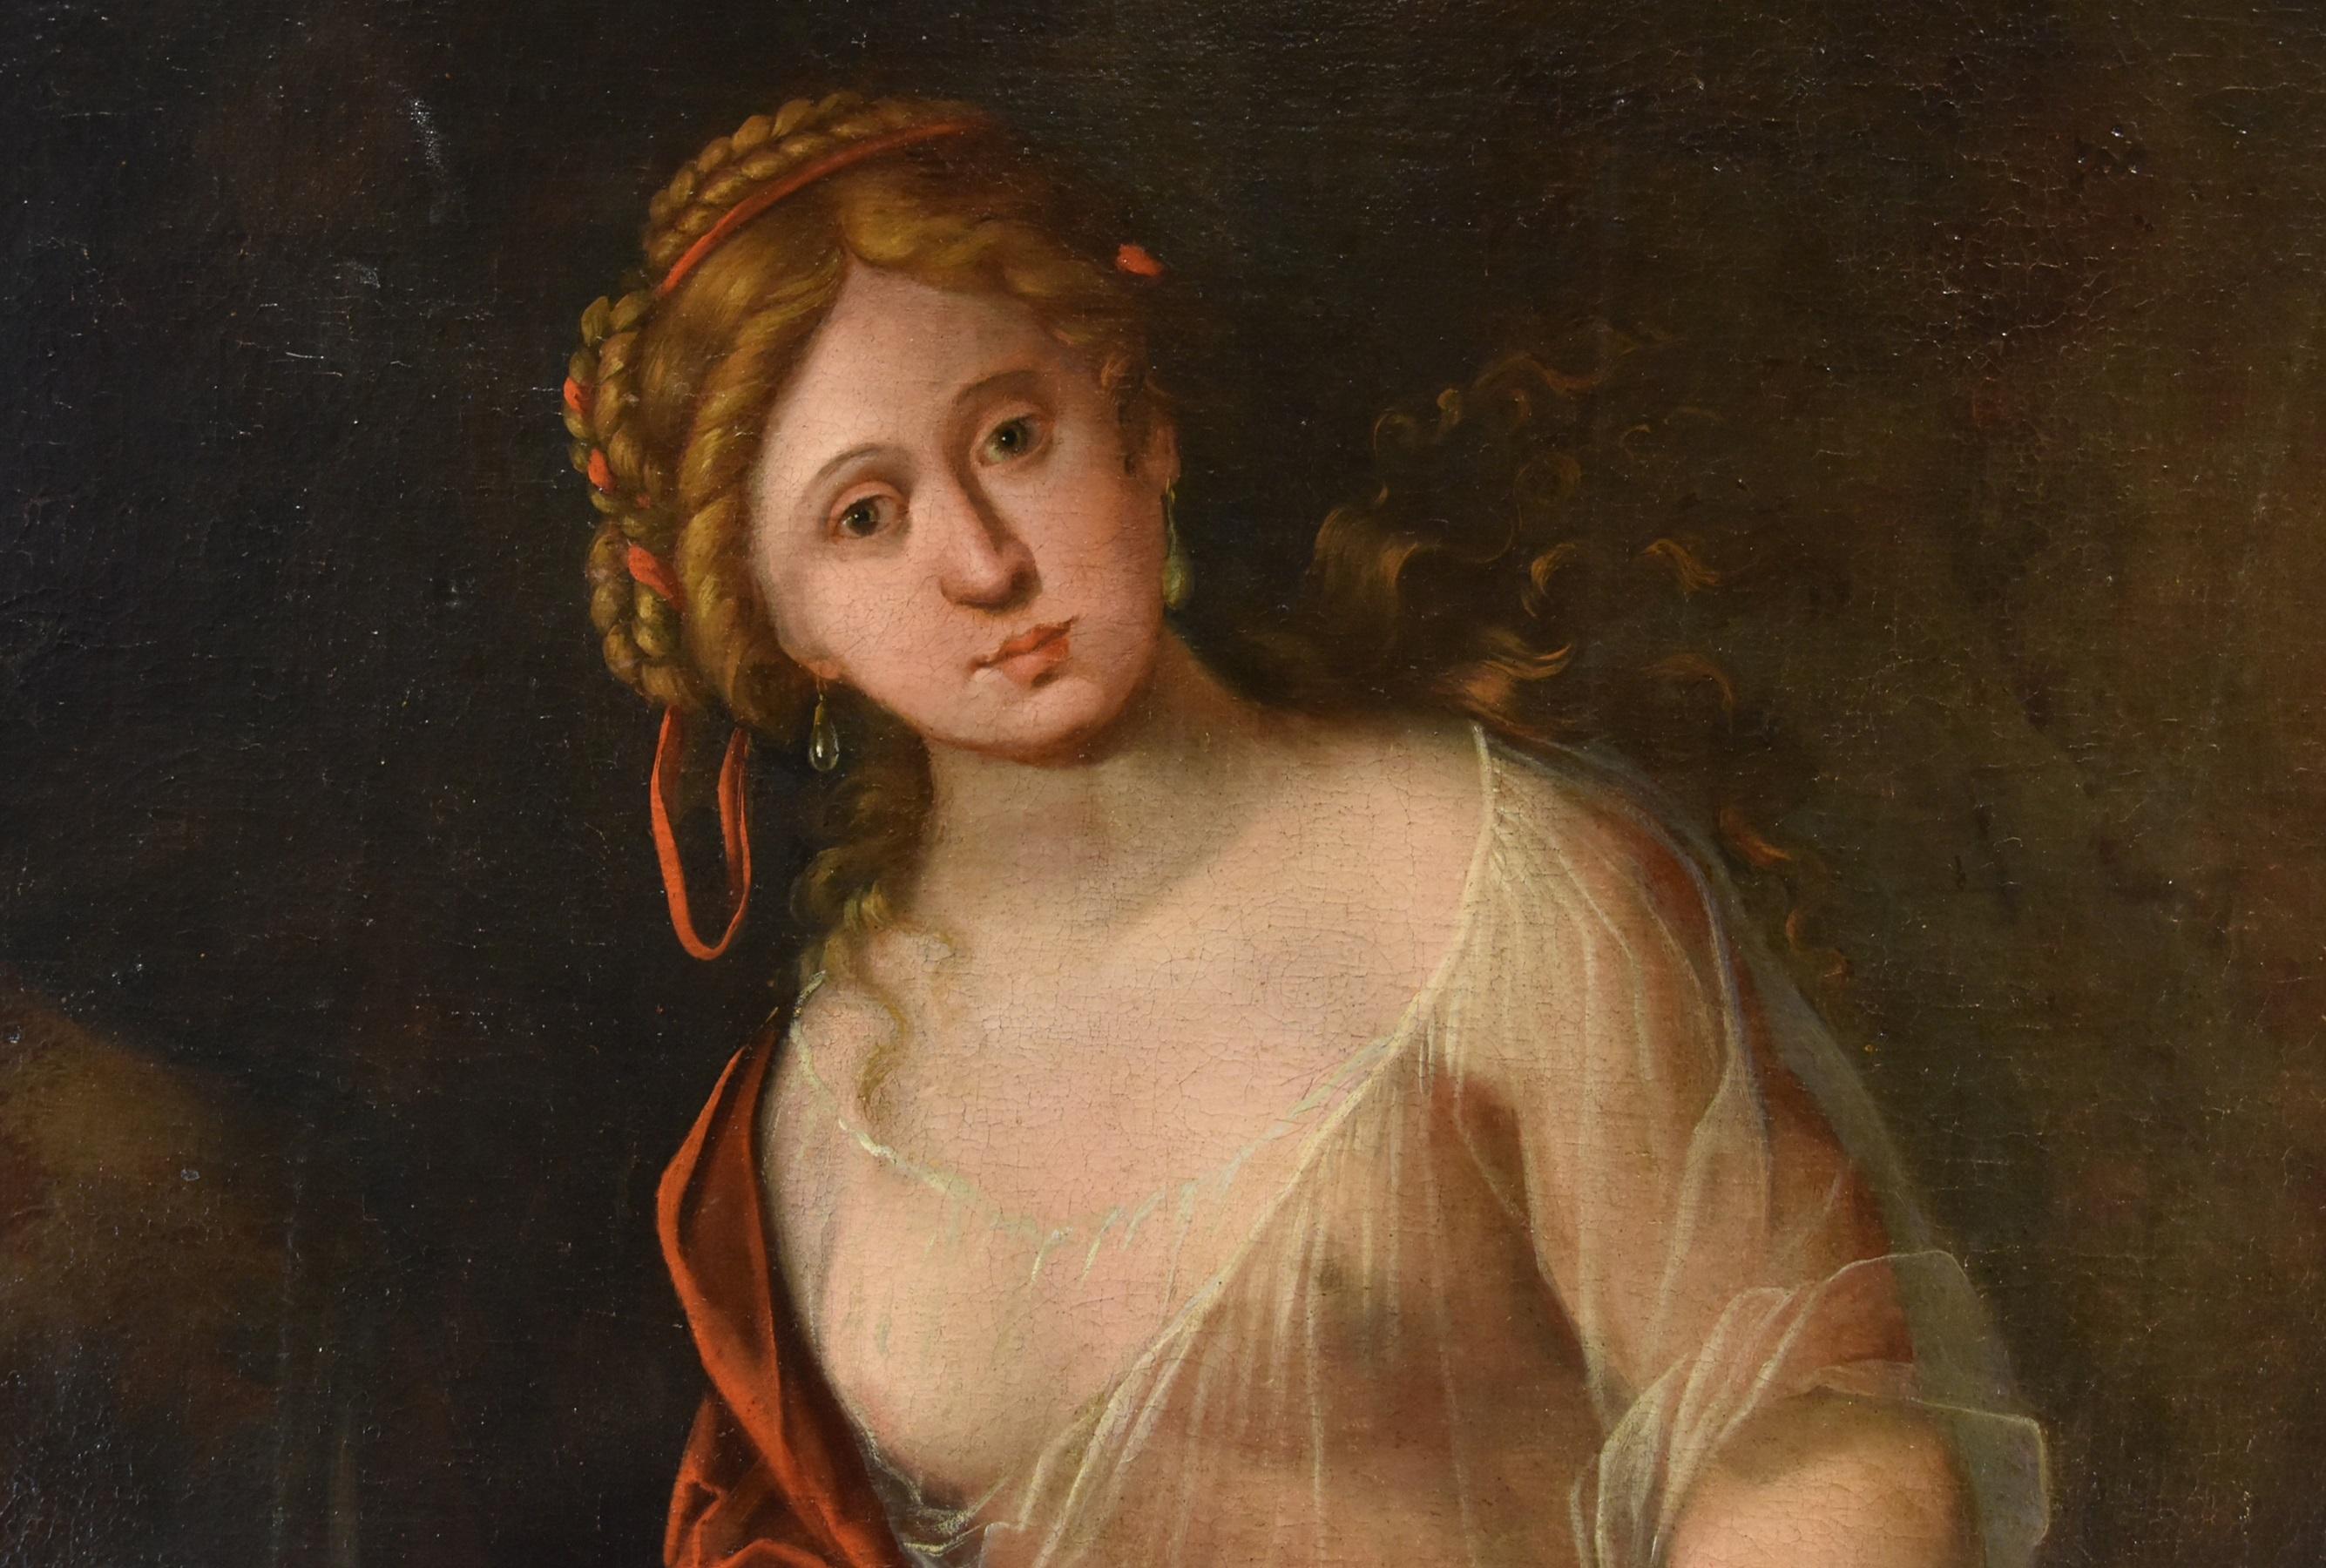 Terwesten Woman Allegory Art Paint Oil on canvas 17/18th Century Old master  For Sale 2